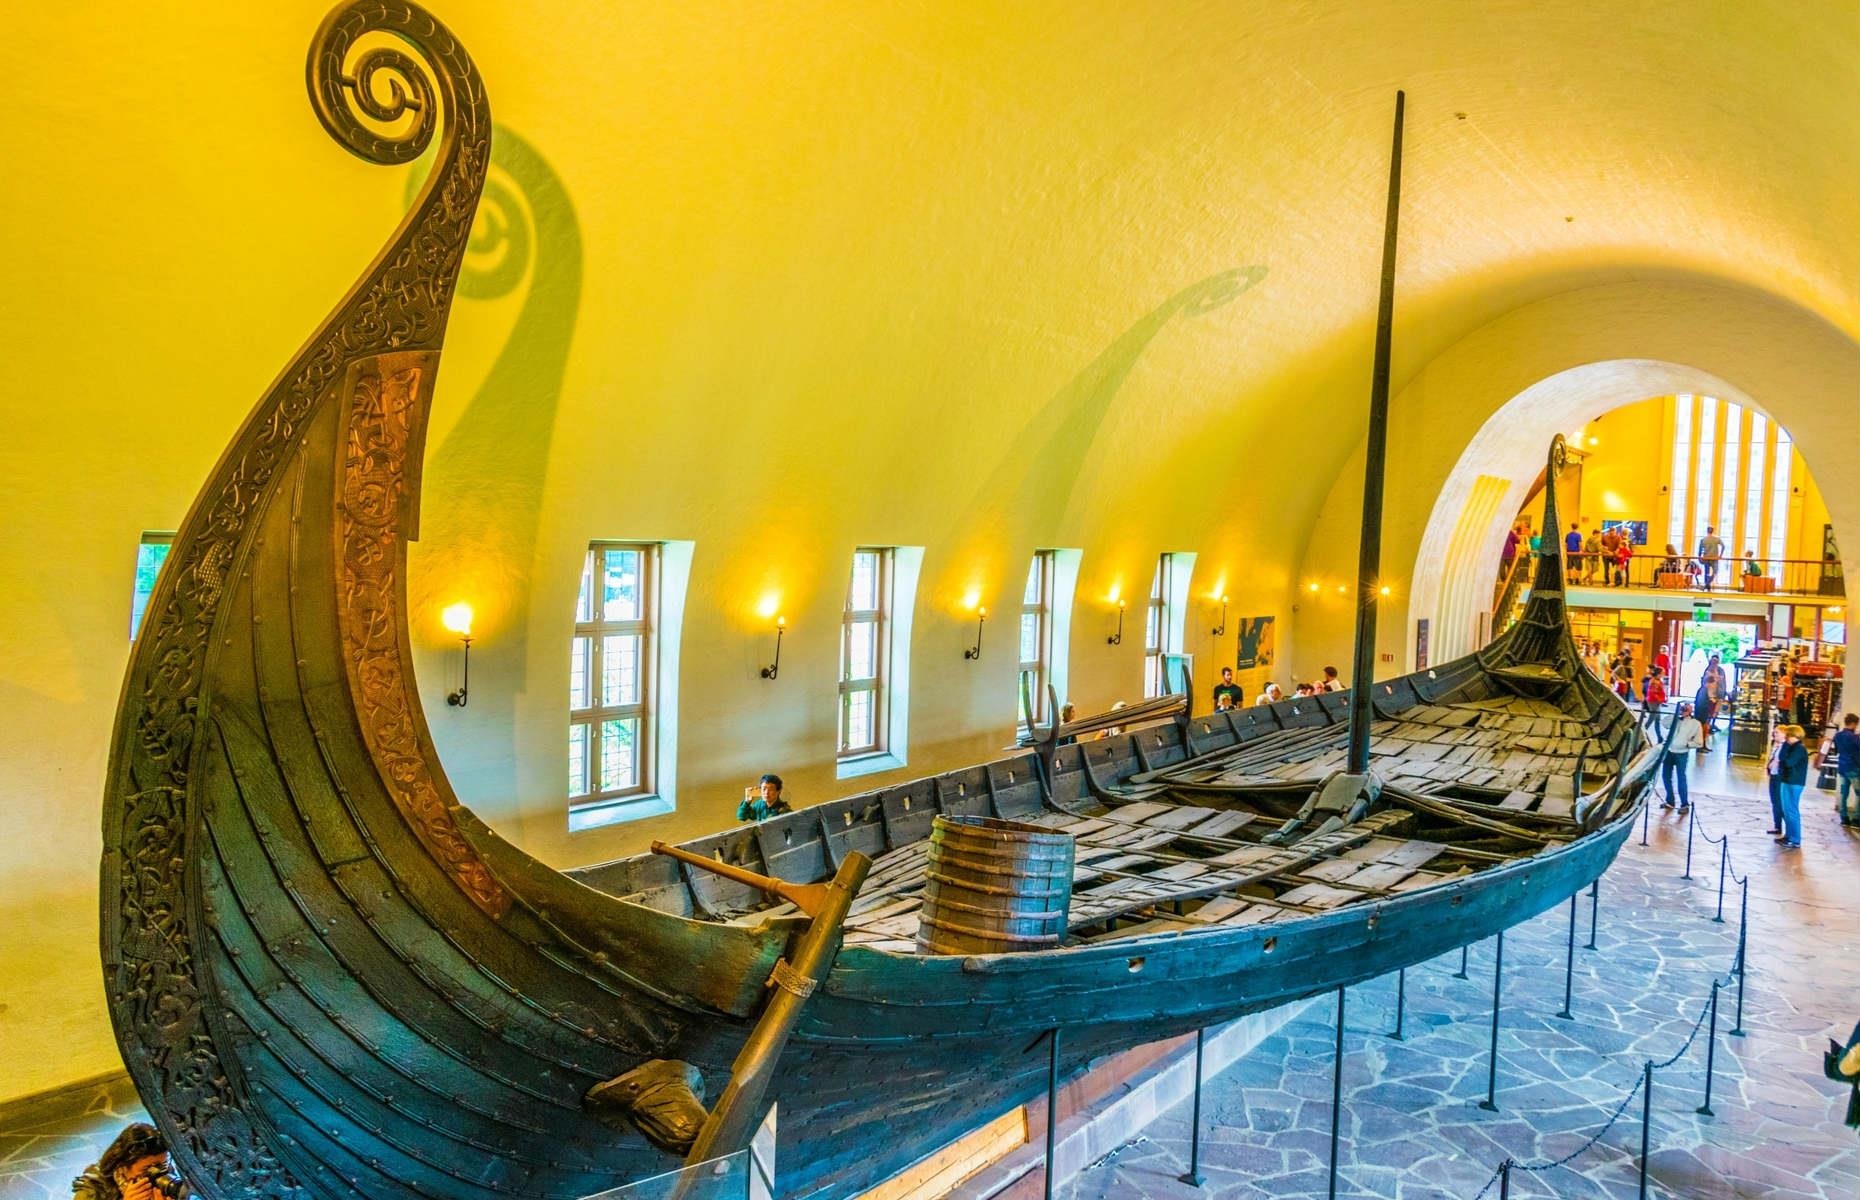 <p>Oslo’s <a href="https://www.khm.uio.no/english/">Viking Ship Museum</a> is home to three fabulously fascinating ships, the Oseberg, Gokstad and the Tune, which help to bring the Vikings to life. Beautifully crafted and well preserved, all three were seagoing vessels before they were brought onto land to be used as burial mounds. When they were discovered, each was found with grave gifts, from everyday objects and religious artefacts. The Viking Ship Museum is closed until 2025, when it will be relaunched as the Museum of the Viking Age.</p>